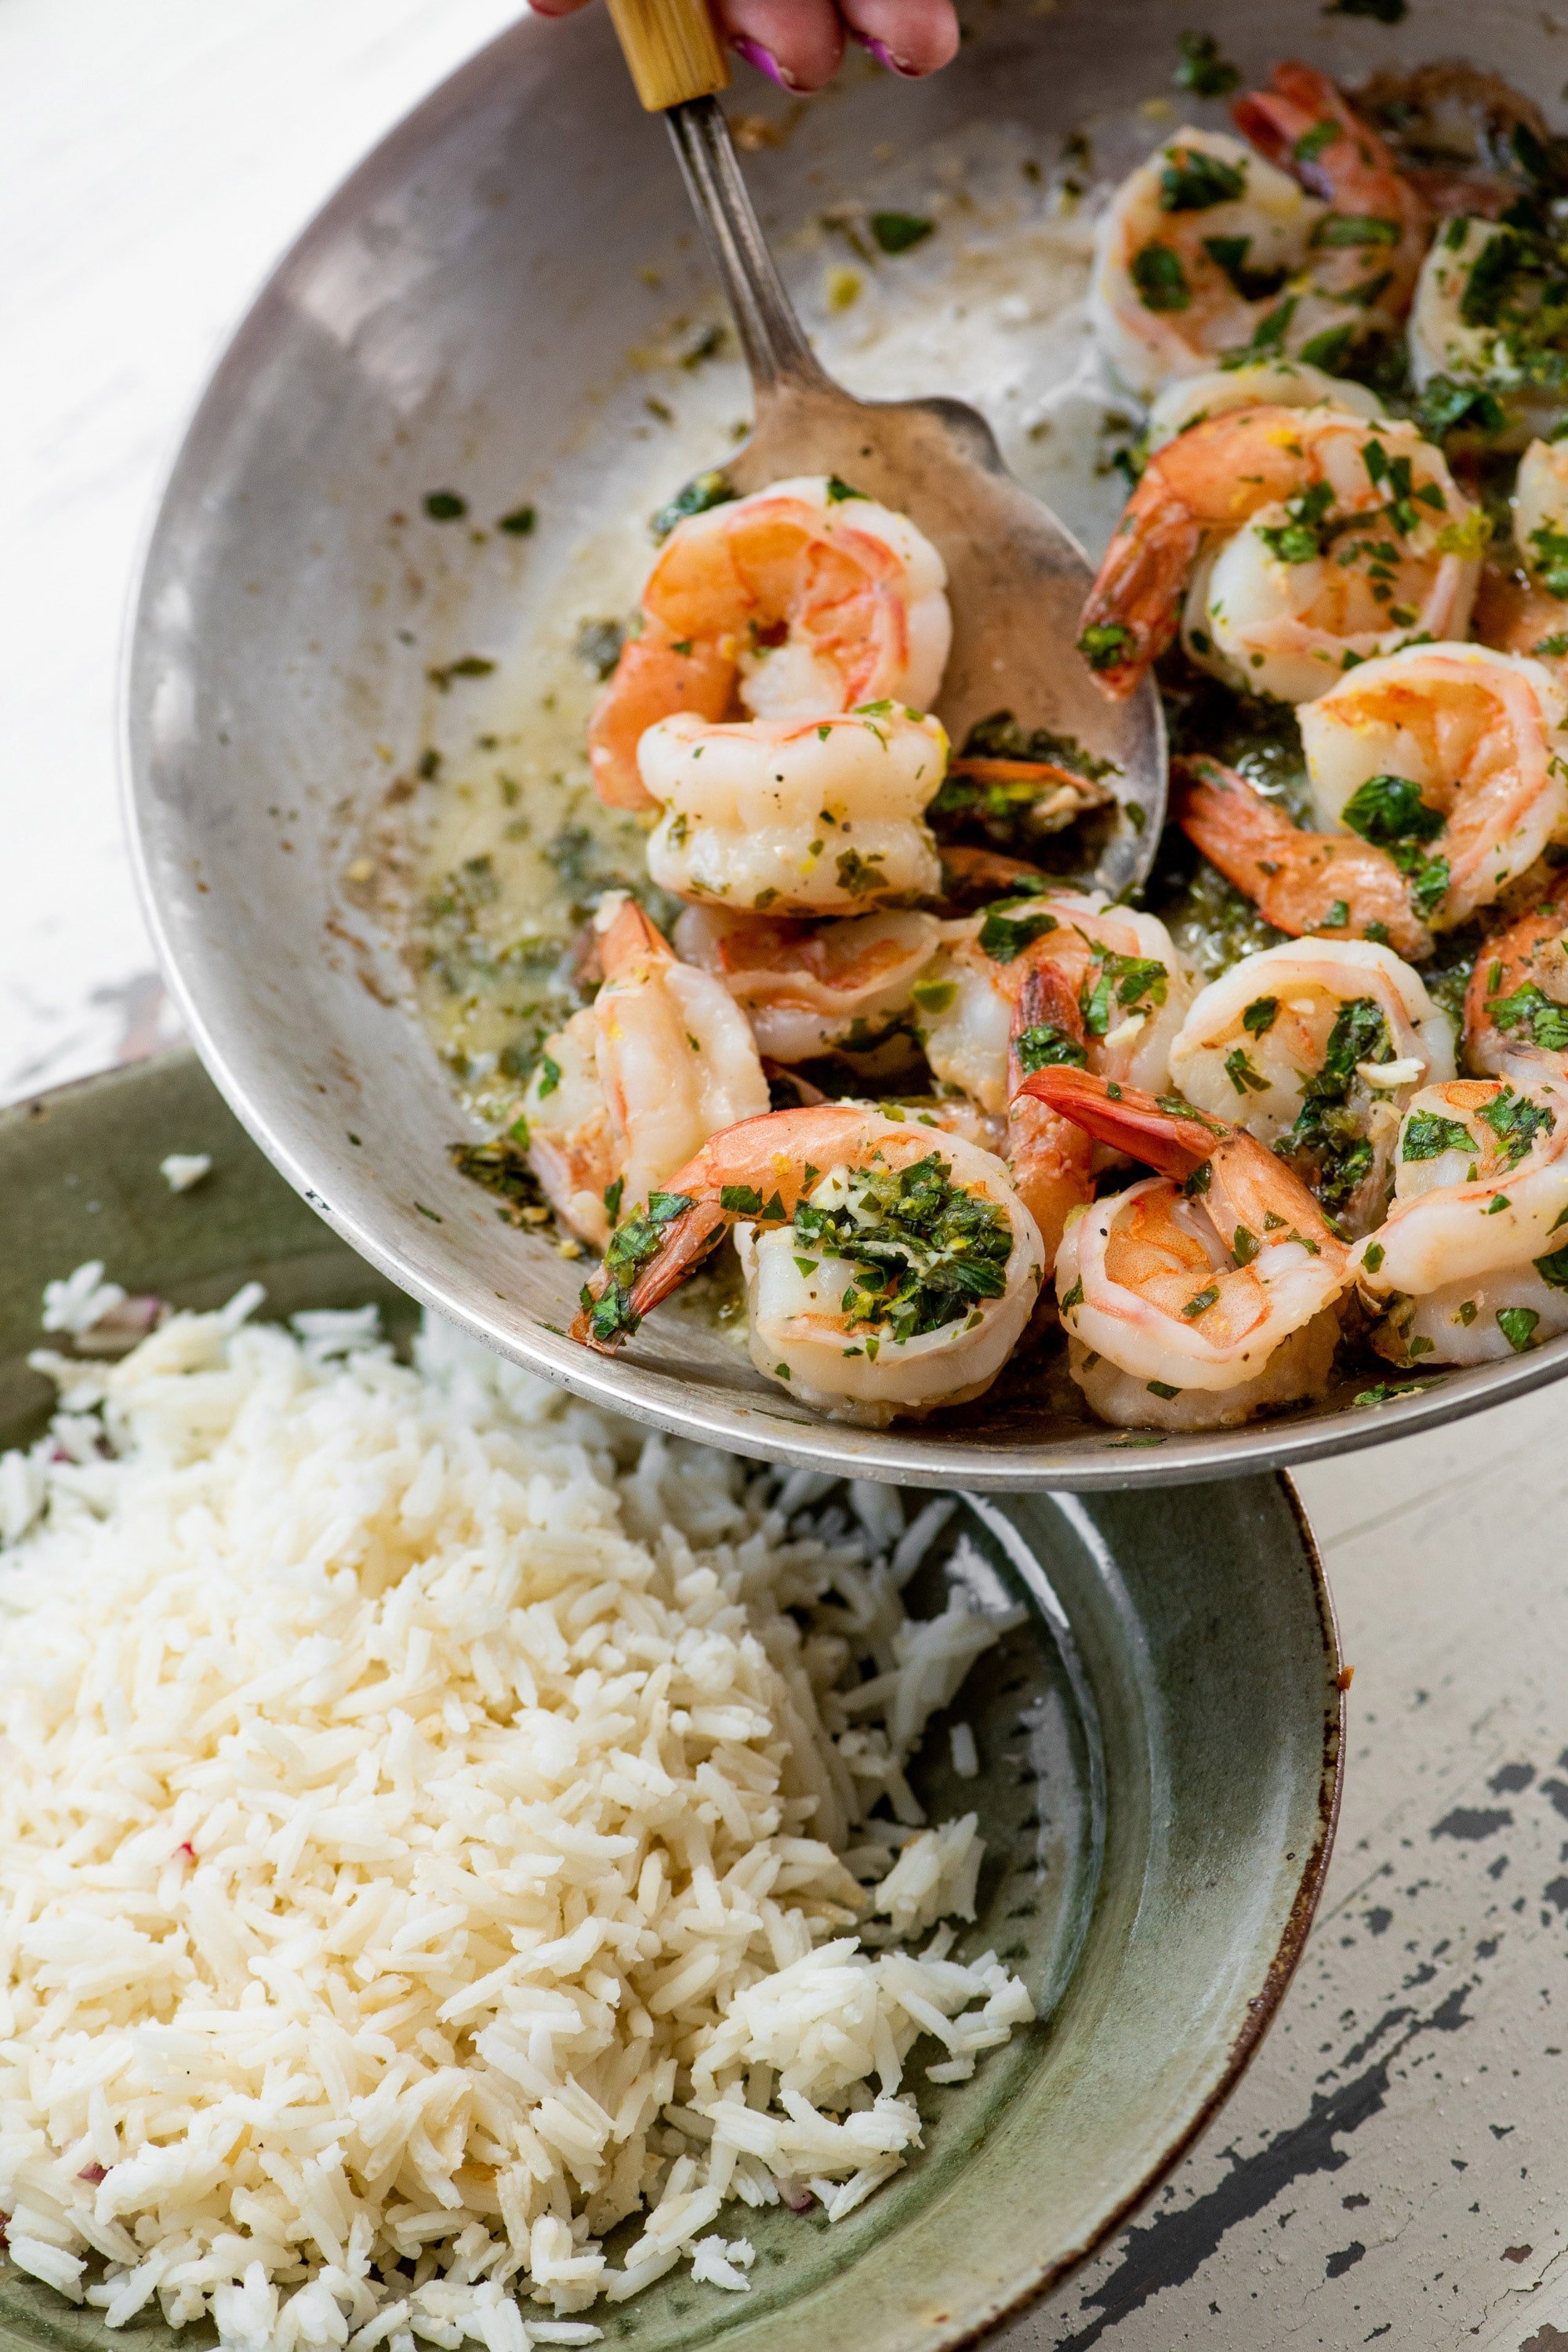 Pouring shrimp over bowl of white rice.